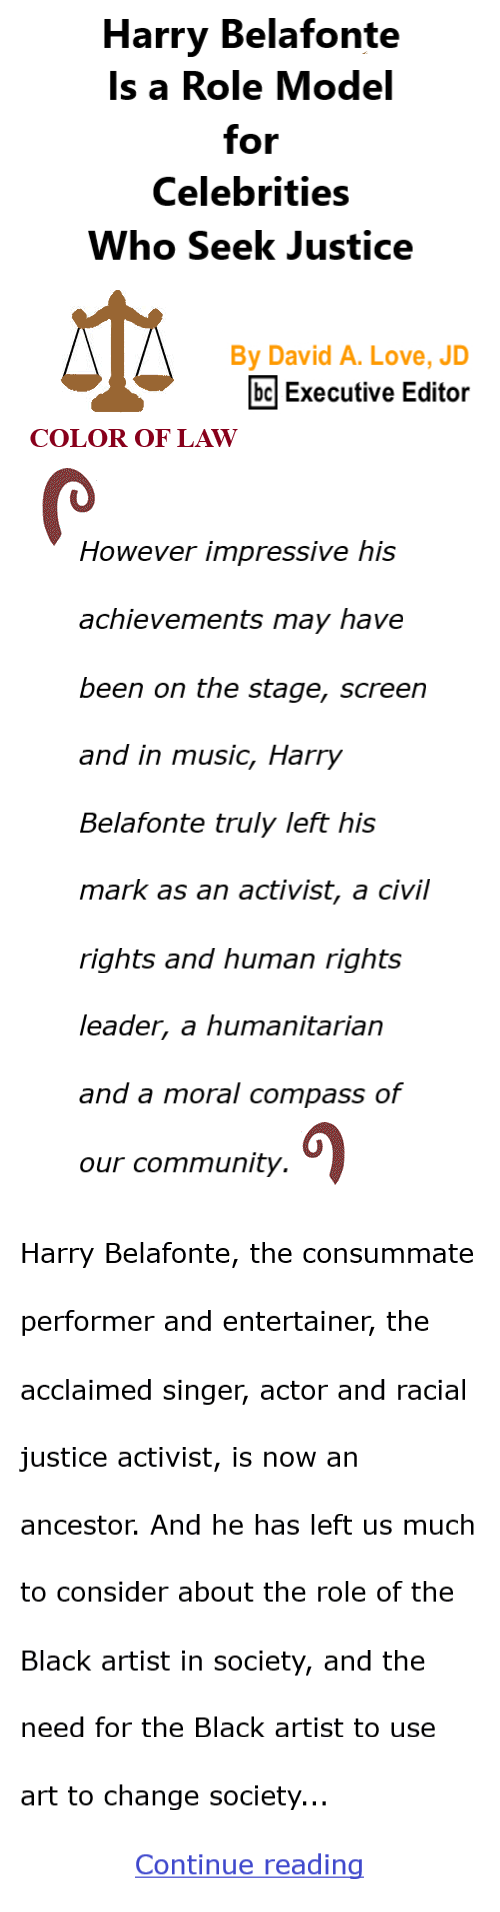 BlackCommentator.com Feb 8, 2024 - Issue 987: Black History Month - Harry Belafonte Is a Role Model for Celebrities Who Seek Justice - Color of Law By David A. Love, JD, BC Executive Editor